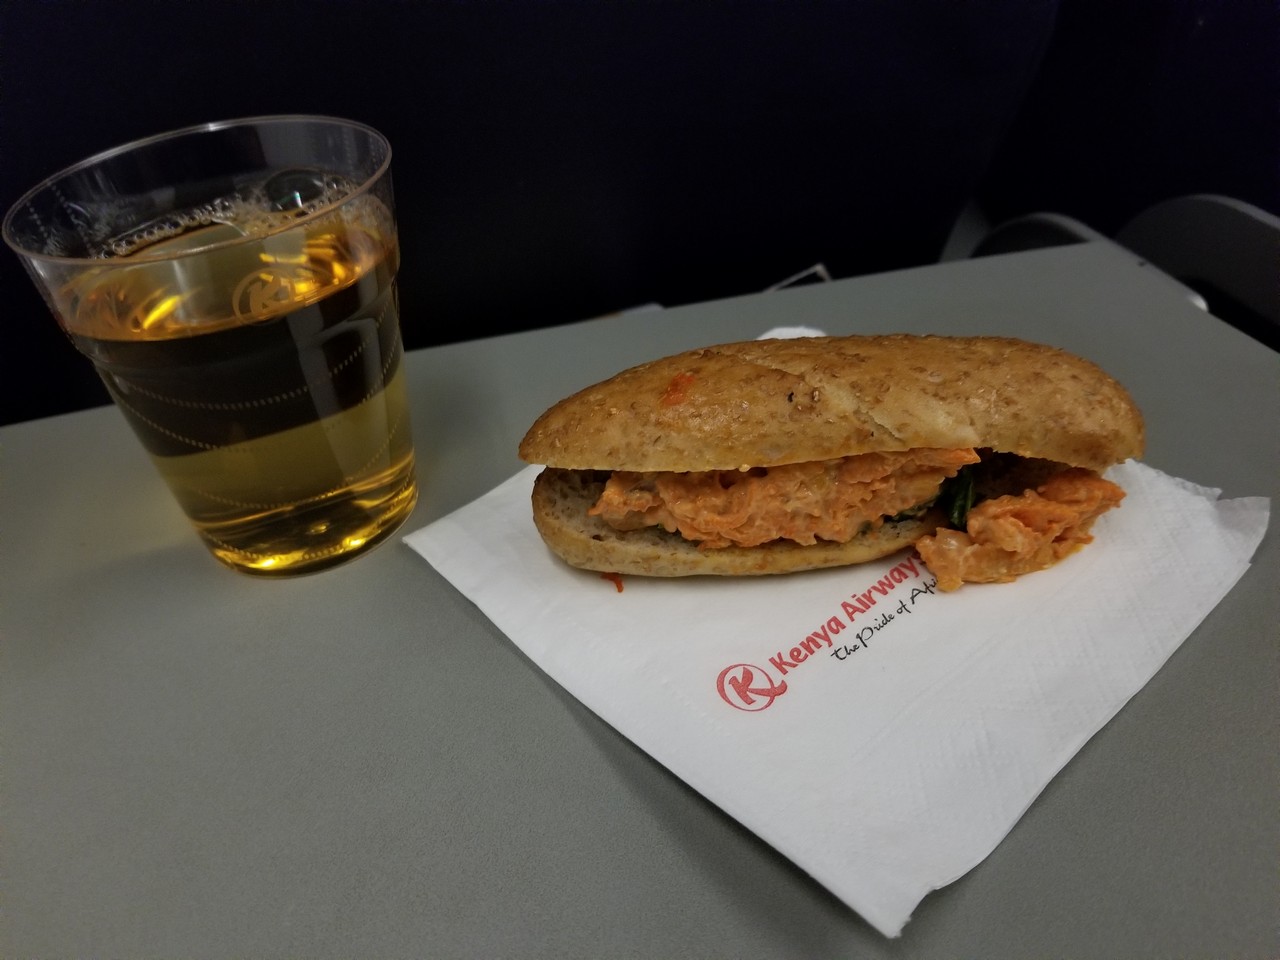 a sandwich and a glass of beer